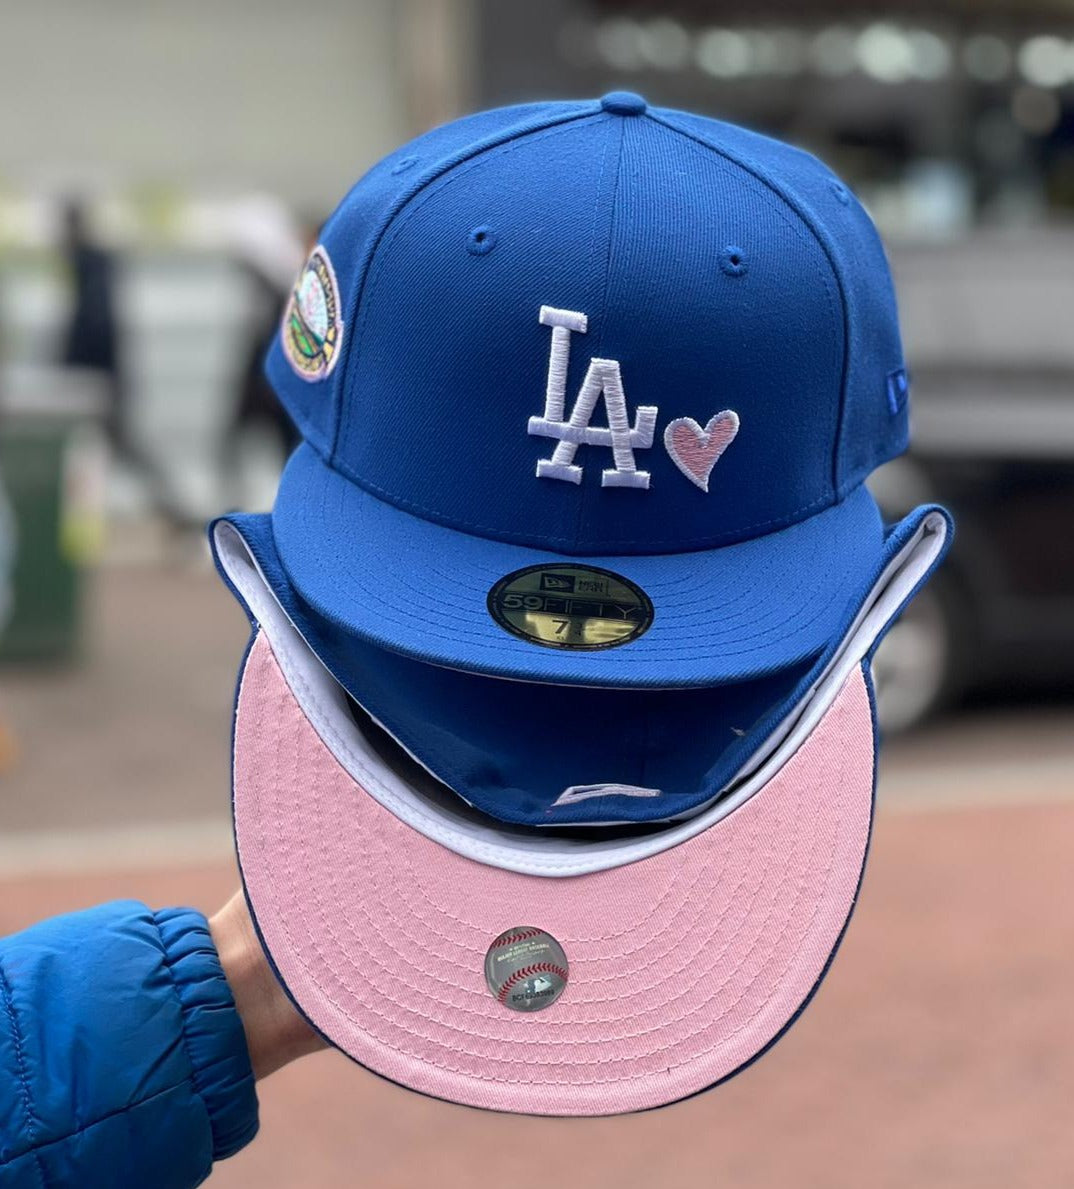 Heart Los Angeles Dodgers Royal Blue Pink Bottom 50th Anniversary